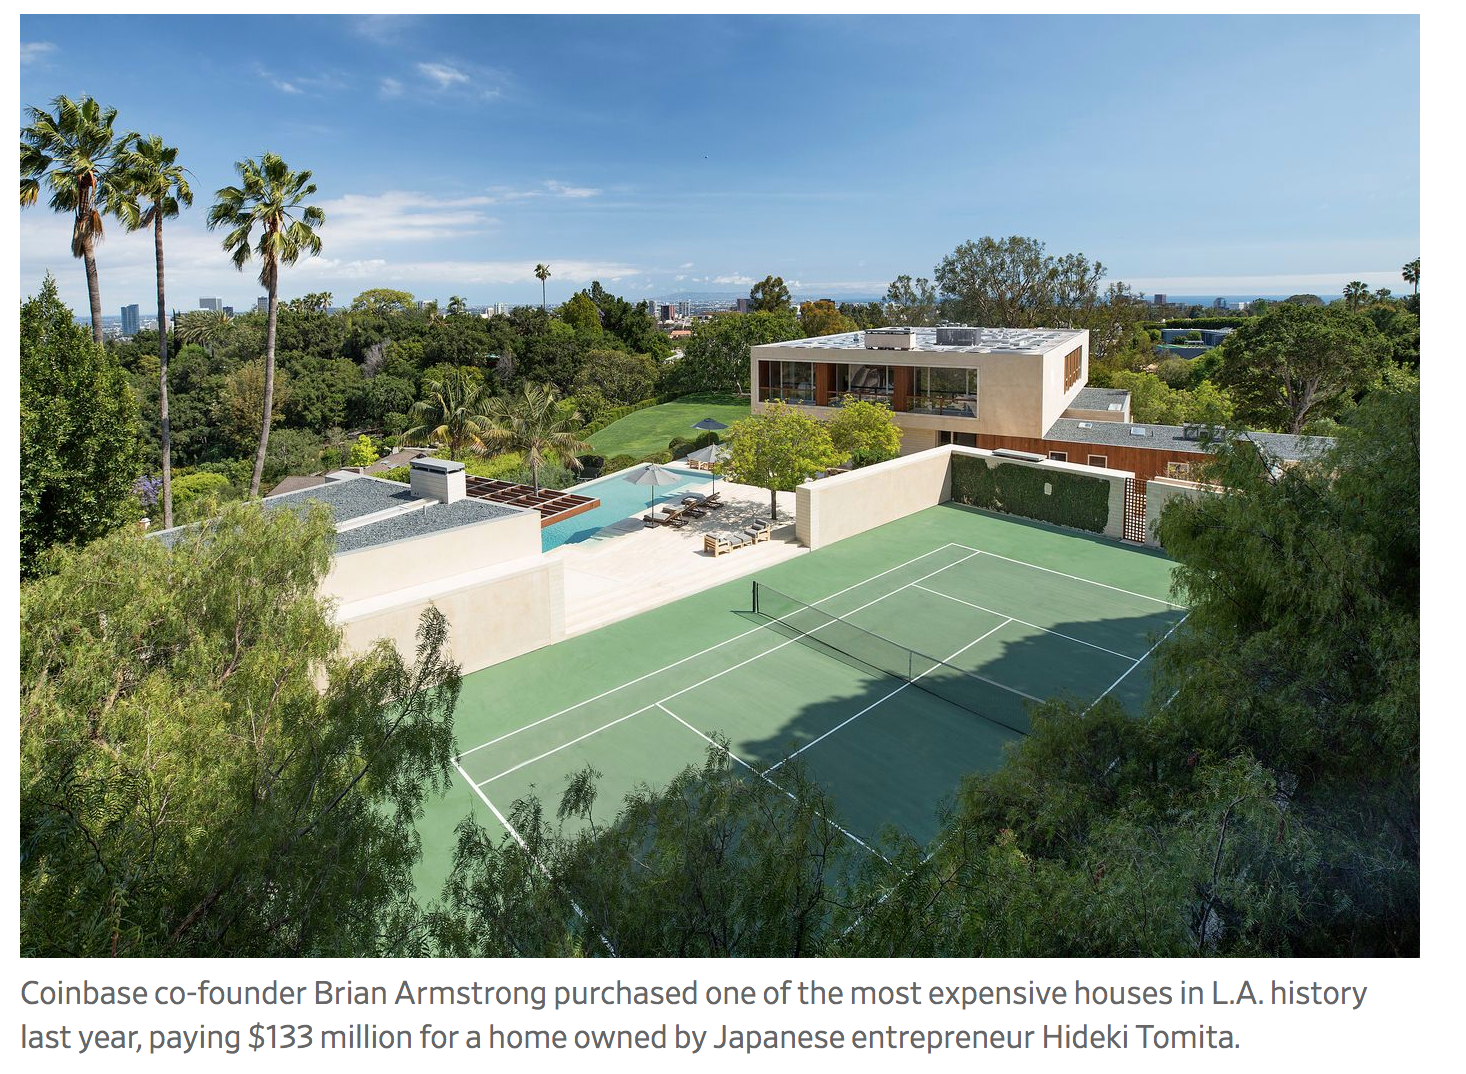 Bitcoin Enthusiast And CEO Brian Armstrong Buys Los Angeles Home For $133 Million